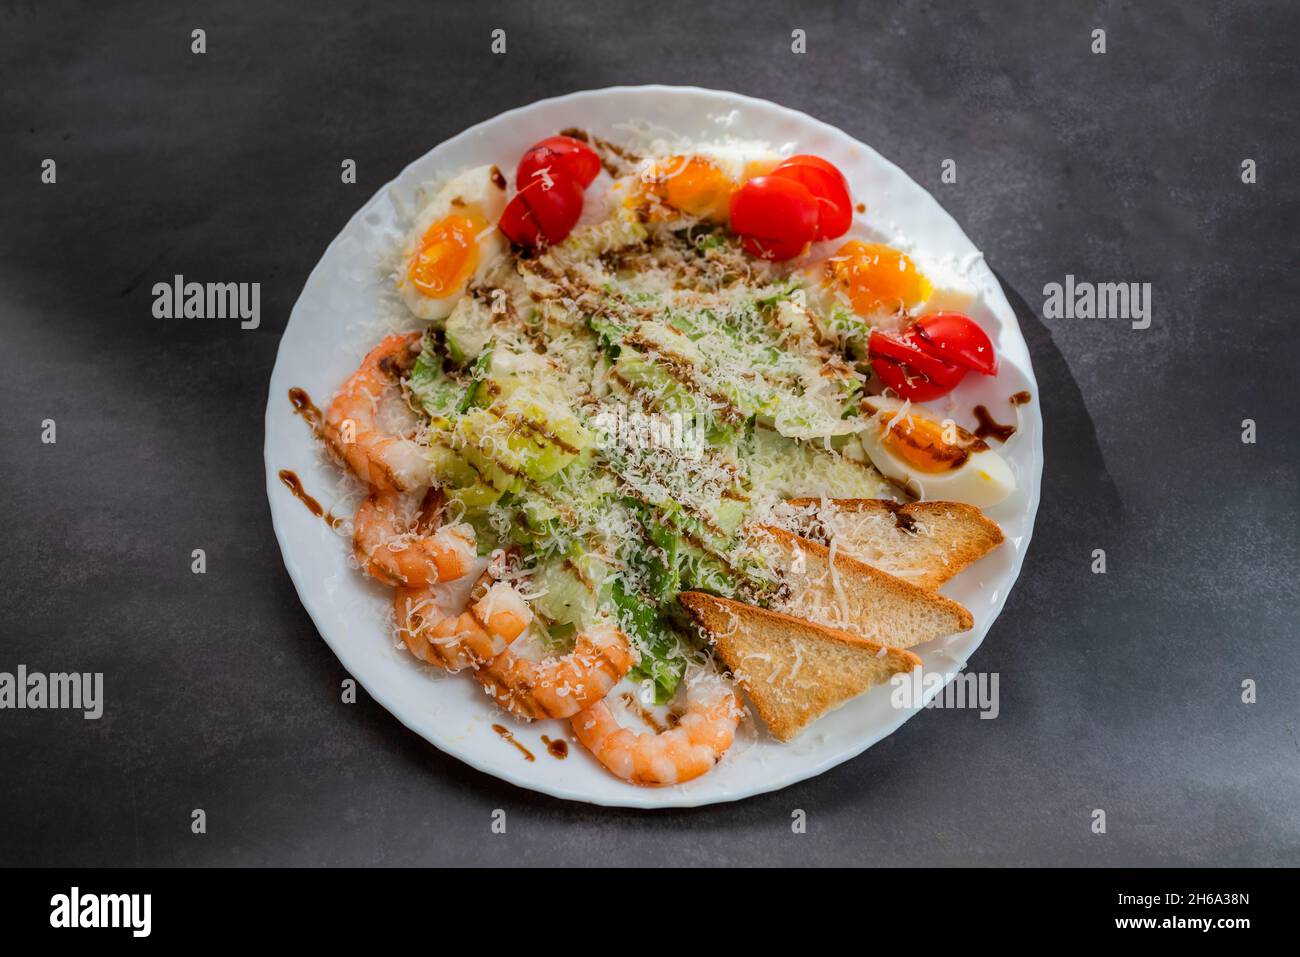 Caesar salad dish with shrimp lettuce and cherry tomatoes Stock Photo